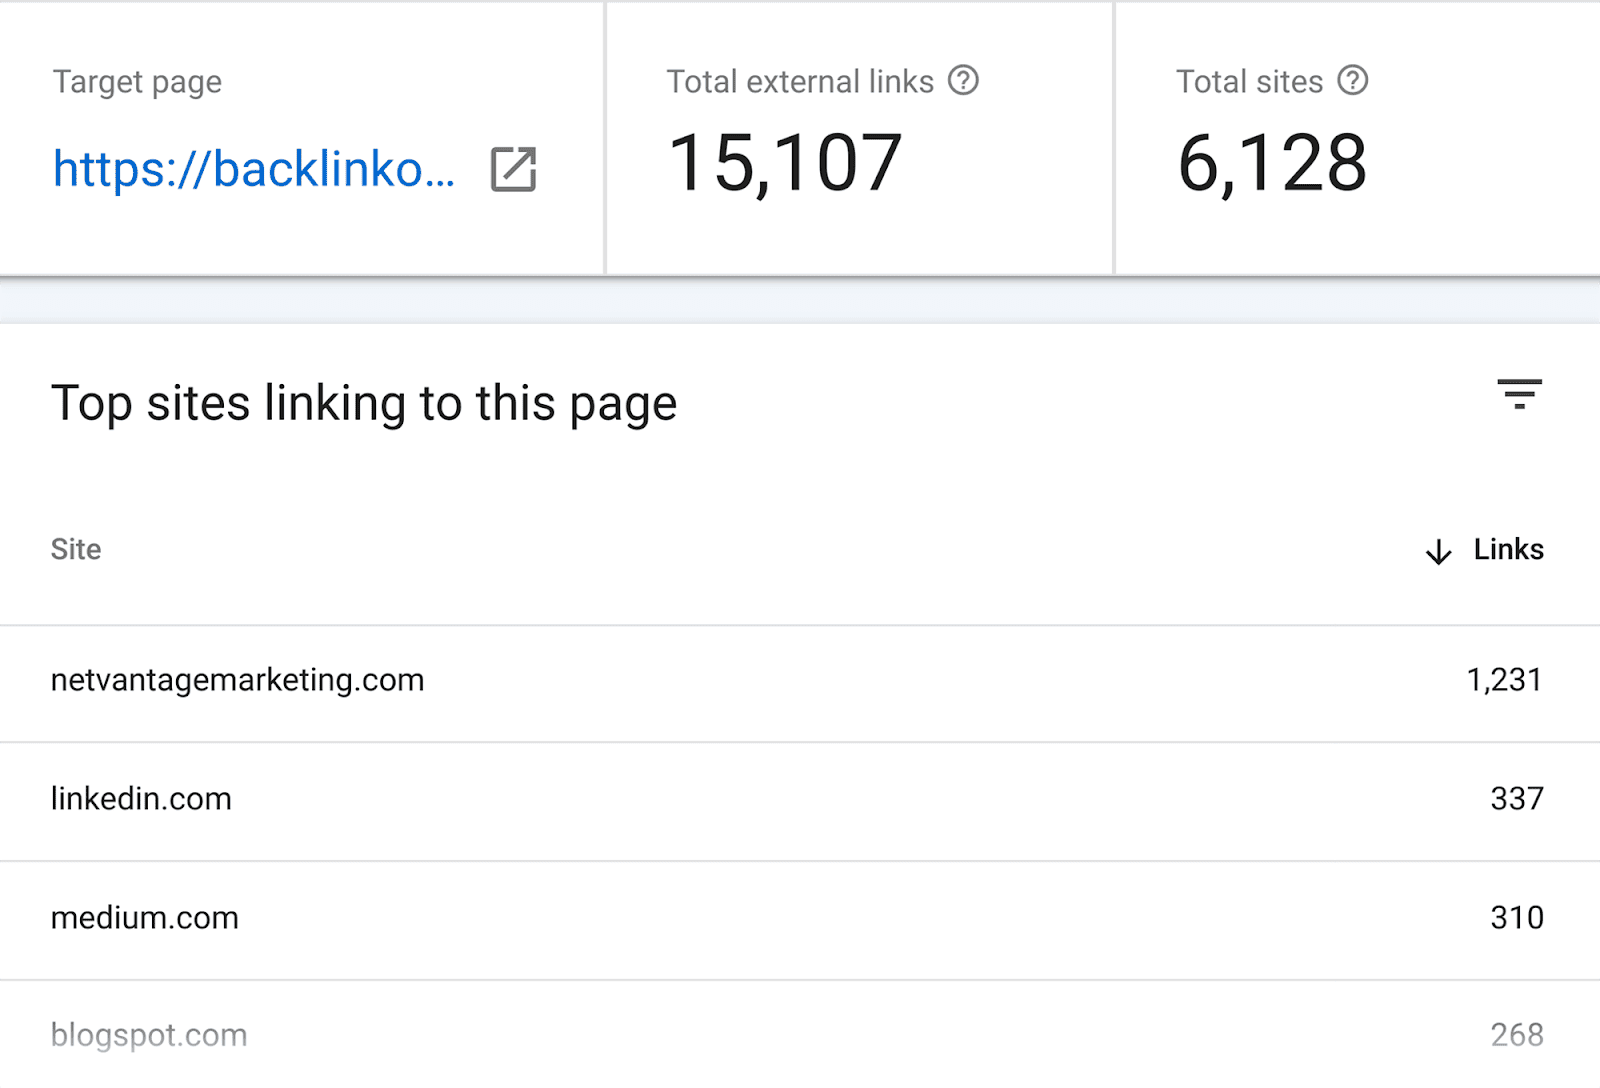 Domains linking to Backlinko homepage